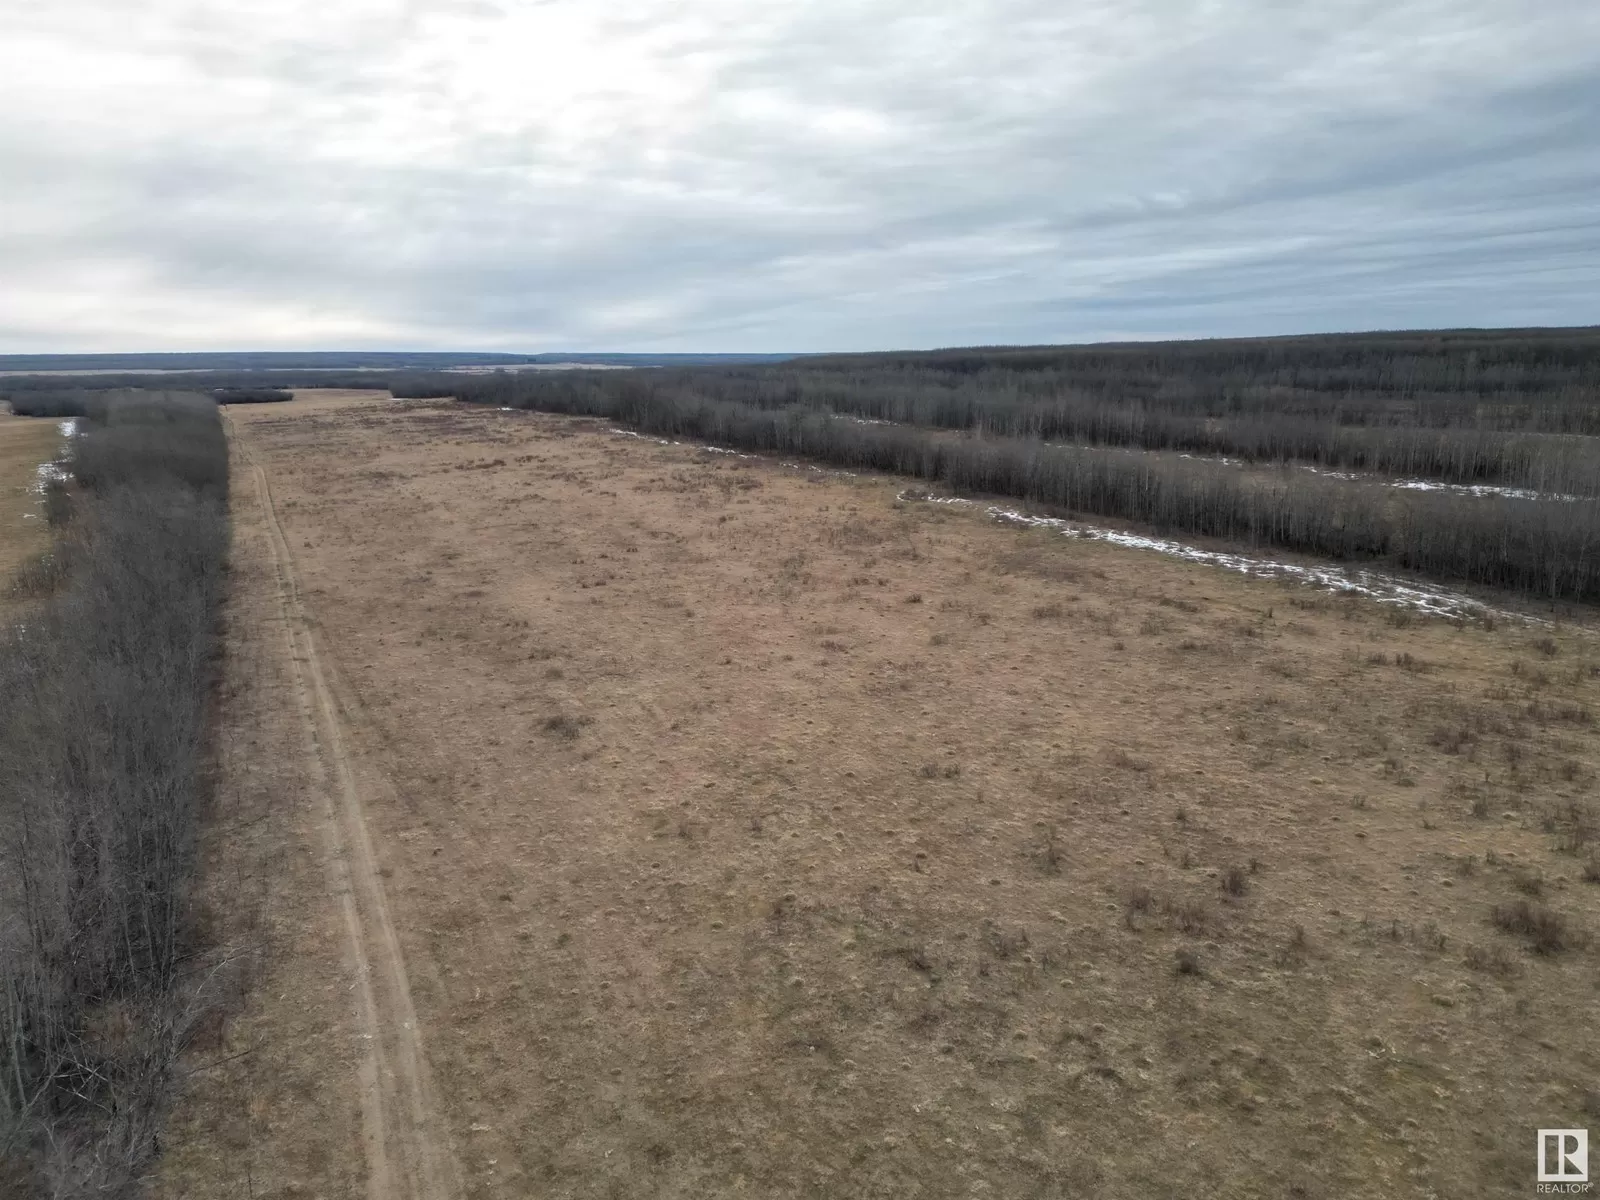 No Building for rent: Rr 194 Twp 810, Rural Northern Sunrise, Alberta T0H 2R0